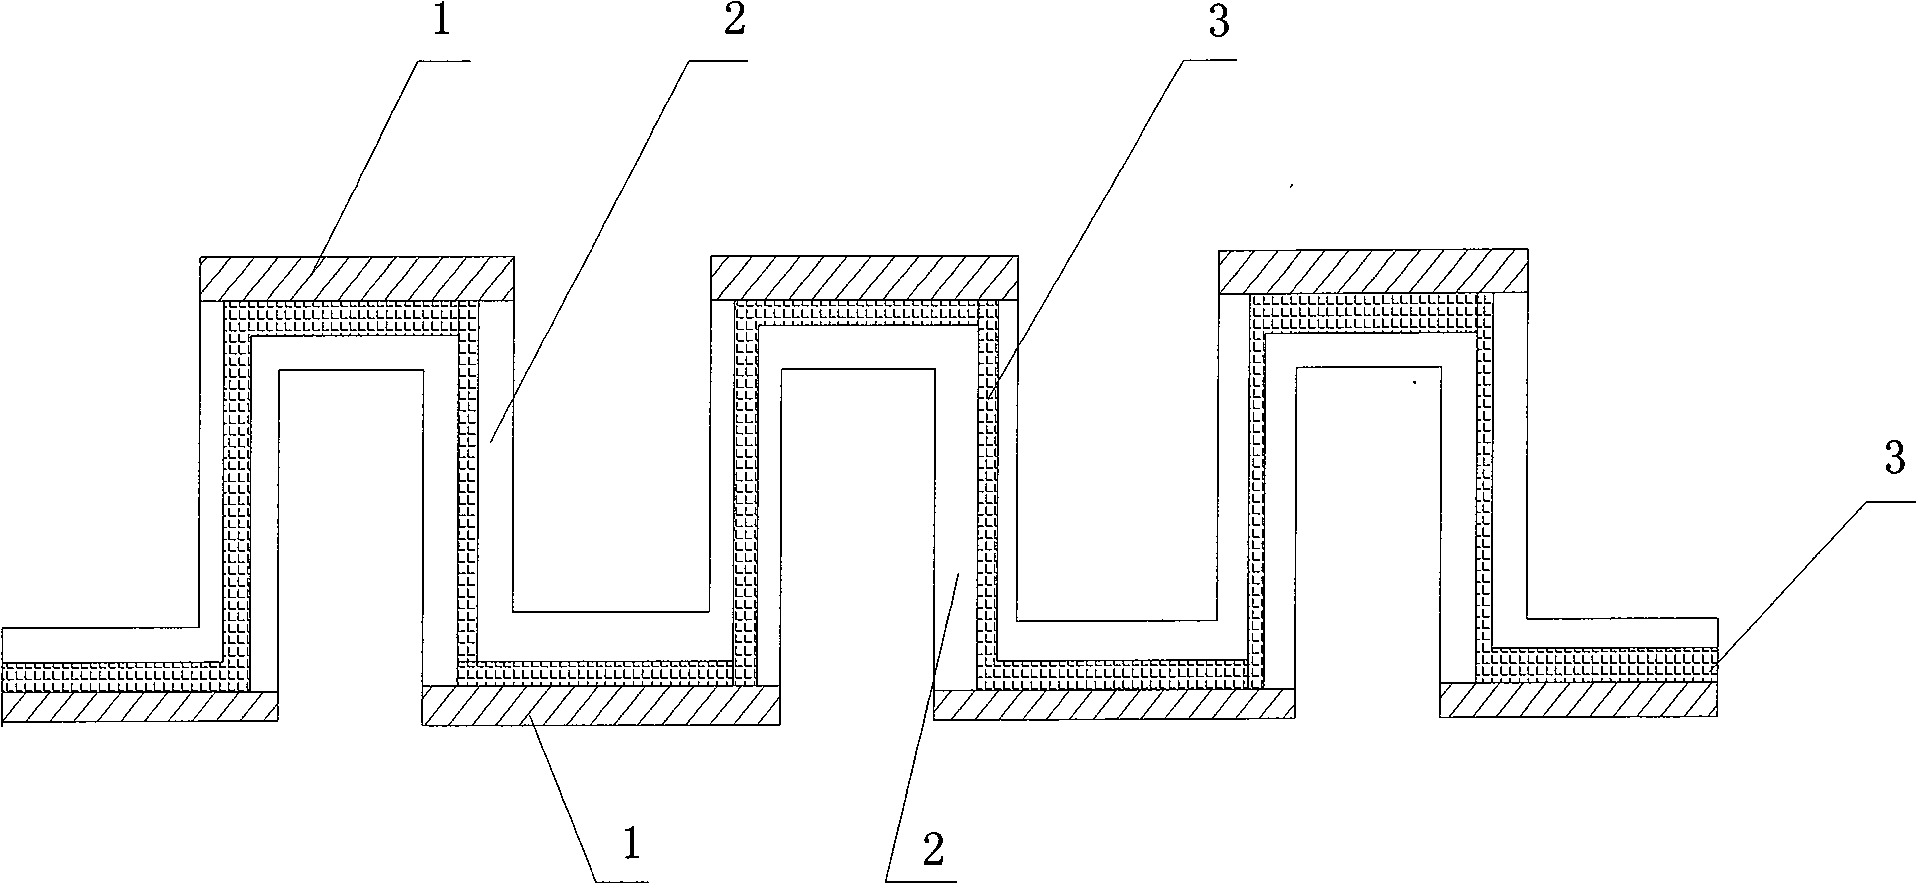 Bipolar plate for proton exchange membrane fuel cell